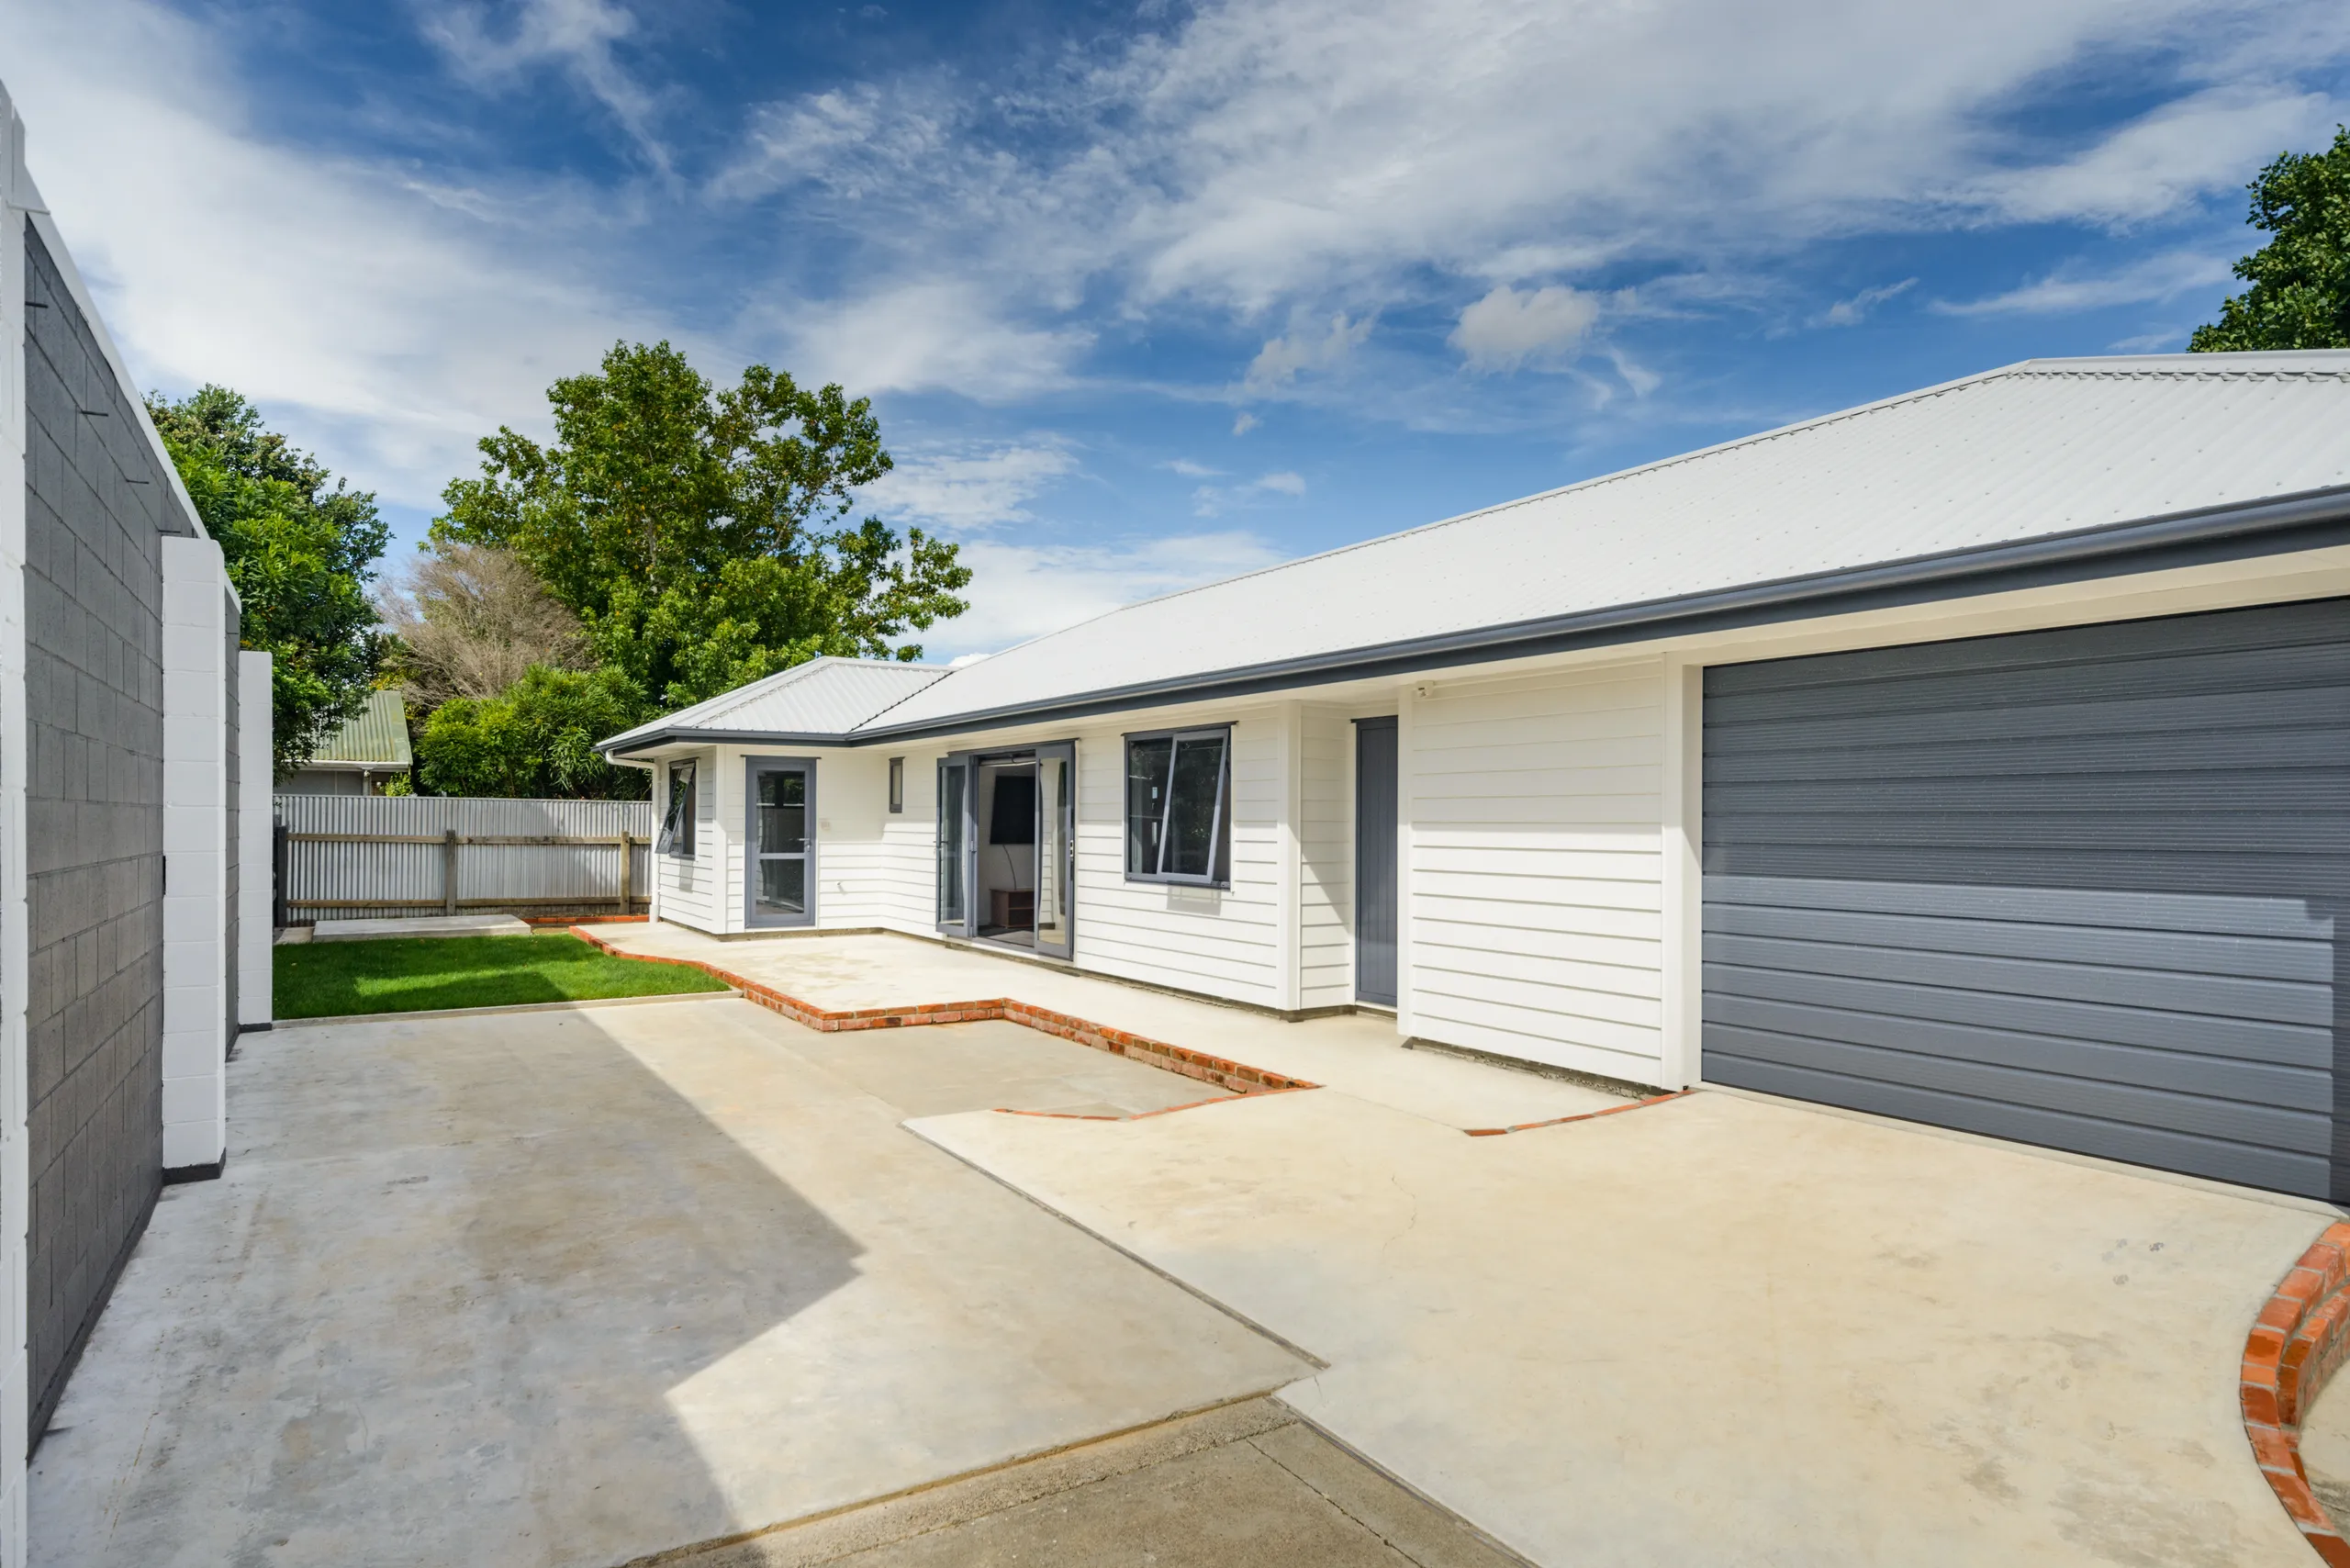 25A Ihle Street, Terrace End, Palmerston North City